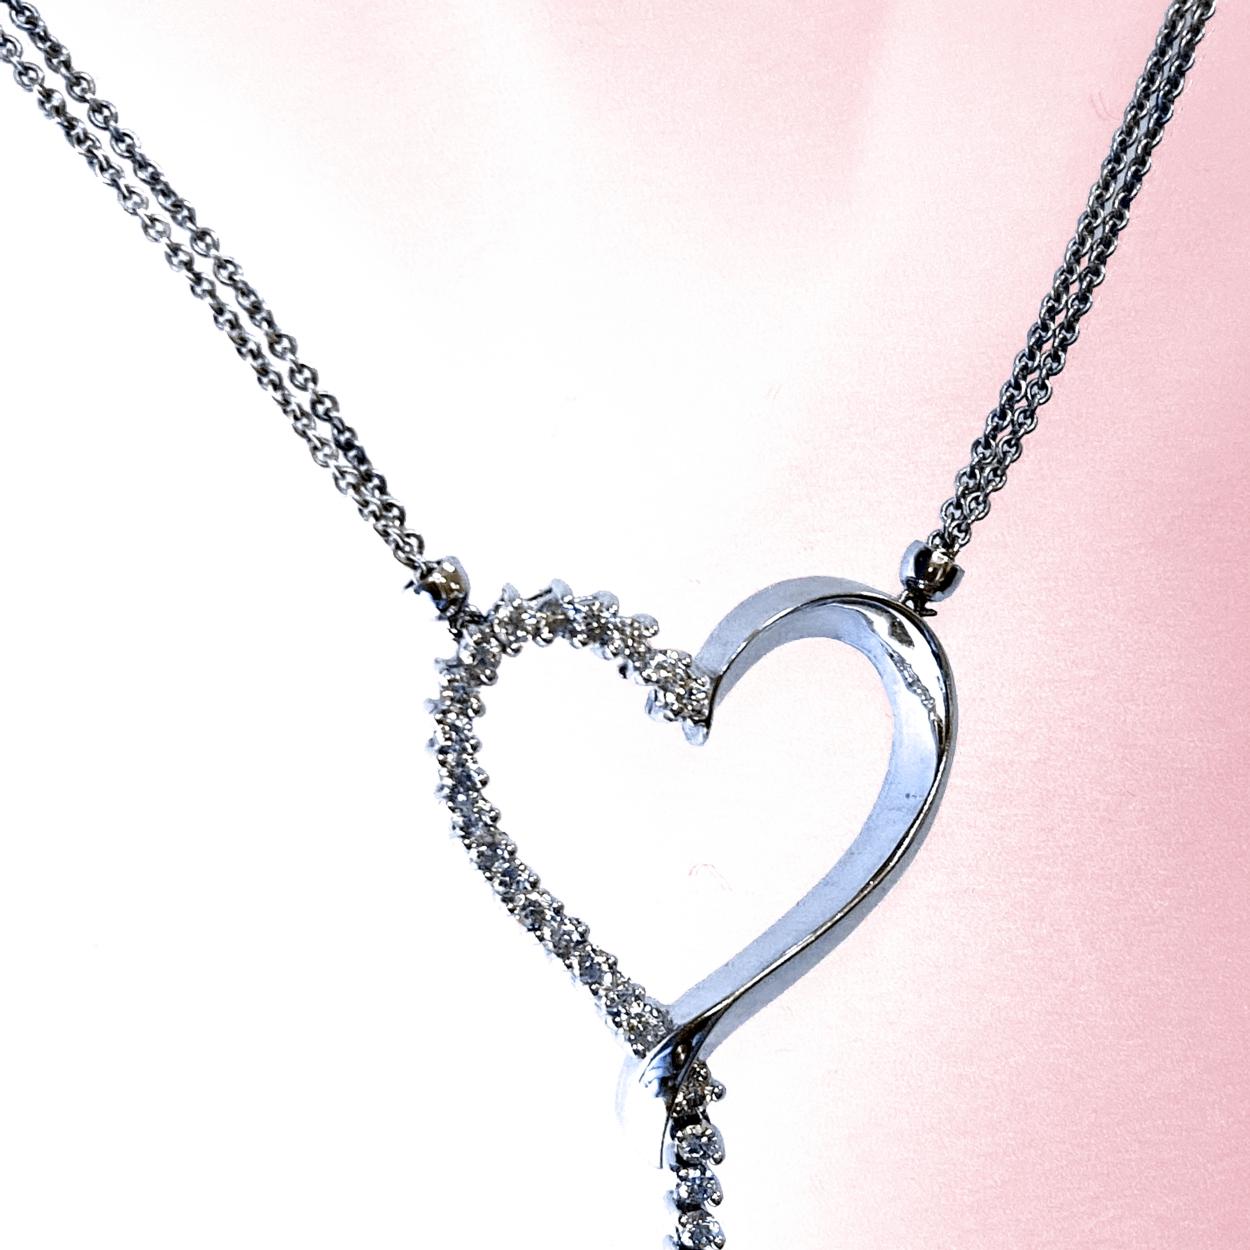 14K Gold Pave Set Diamond Heart Necklace on double strand chain. 35 pieces of 1.7mm Round Brilliant diamonds with total Diamond Weight of 0.85 Ct. 
Total Diamond Weight: 0.85 Ct
Total Necklace Weight: 9.55 gr
Heart Pendant Size 25x25 mm
Dangle